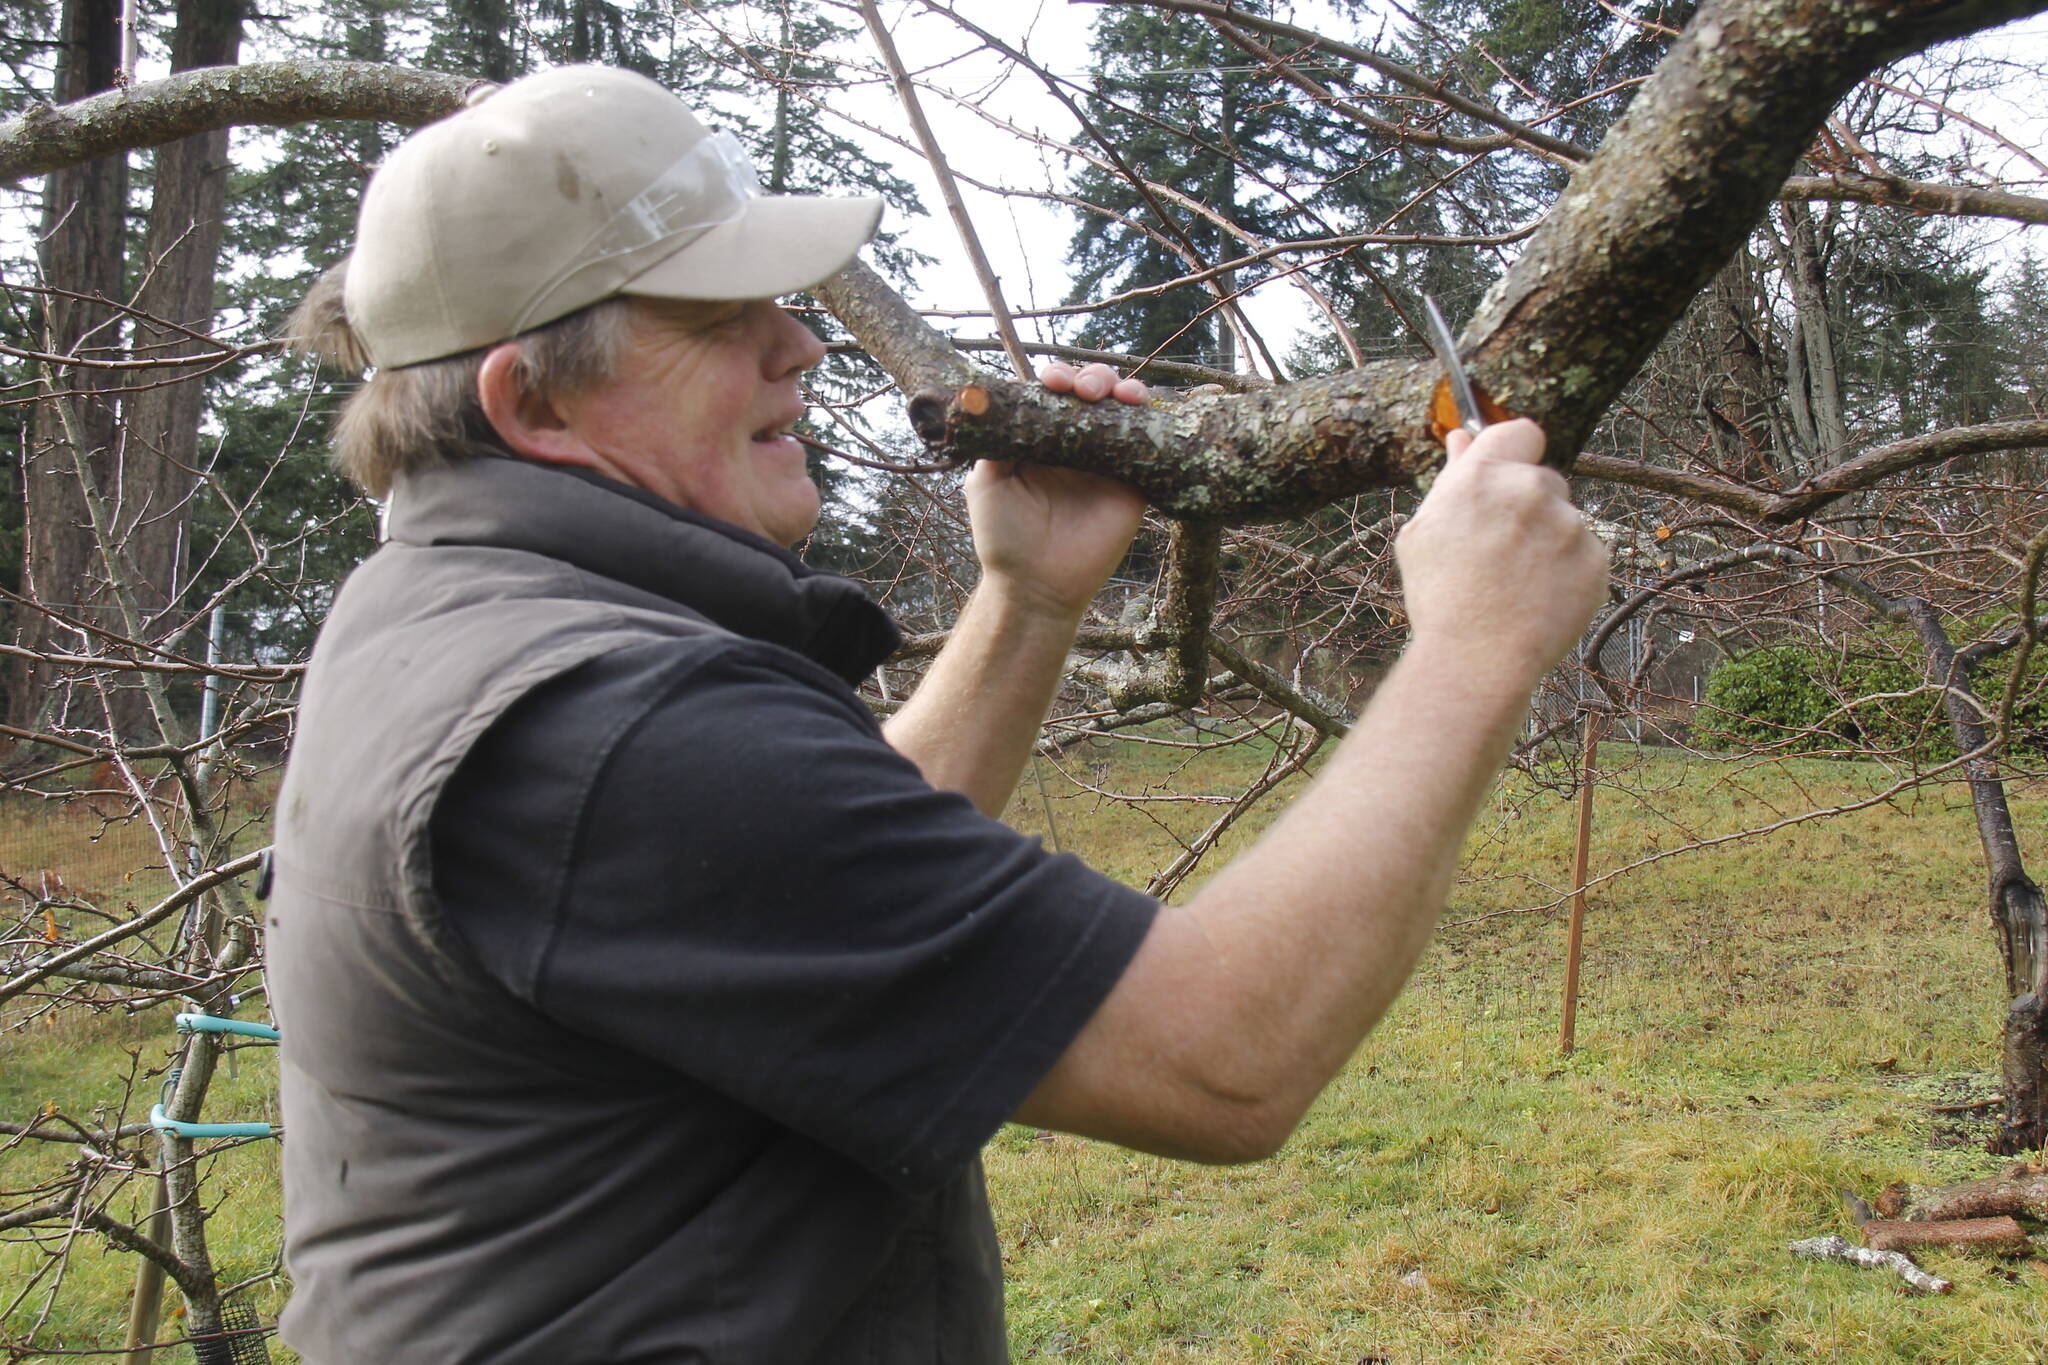 Dan Vorhis prunes a fruit tree at his farm with the Raider Creek pocketknife, which he invented. (Photo by Kira Erickson/South Whidbey Record)